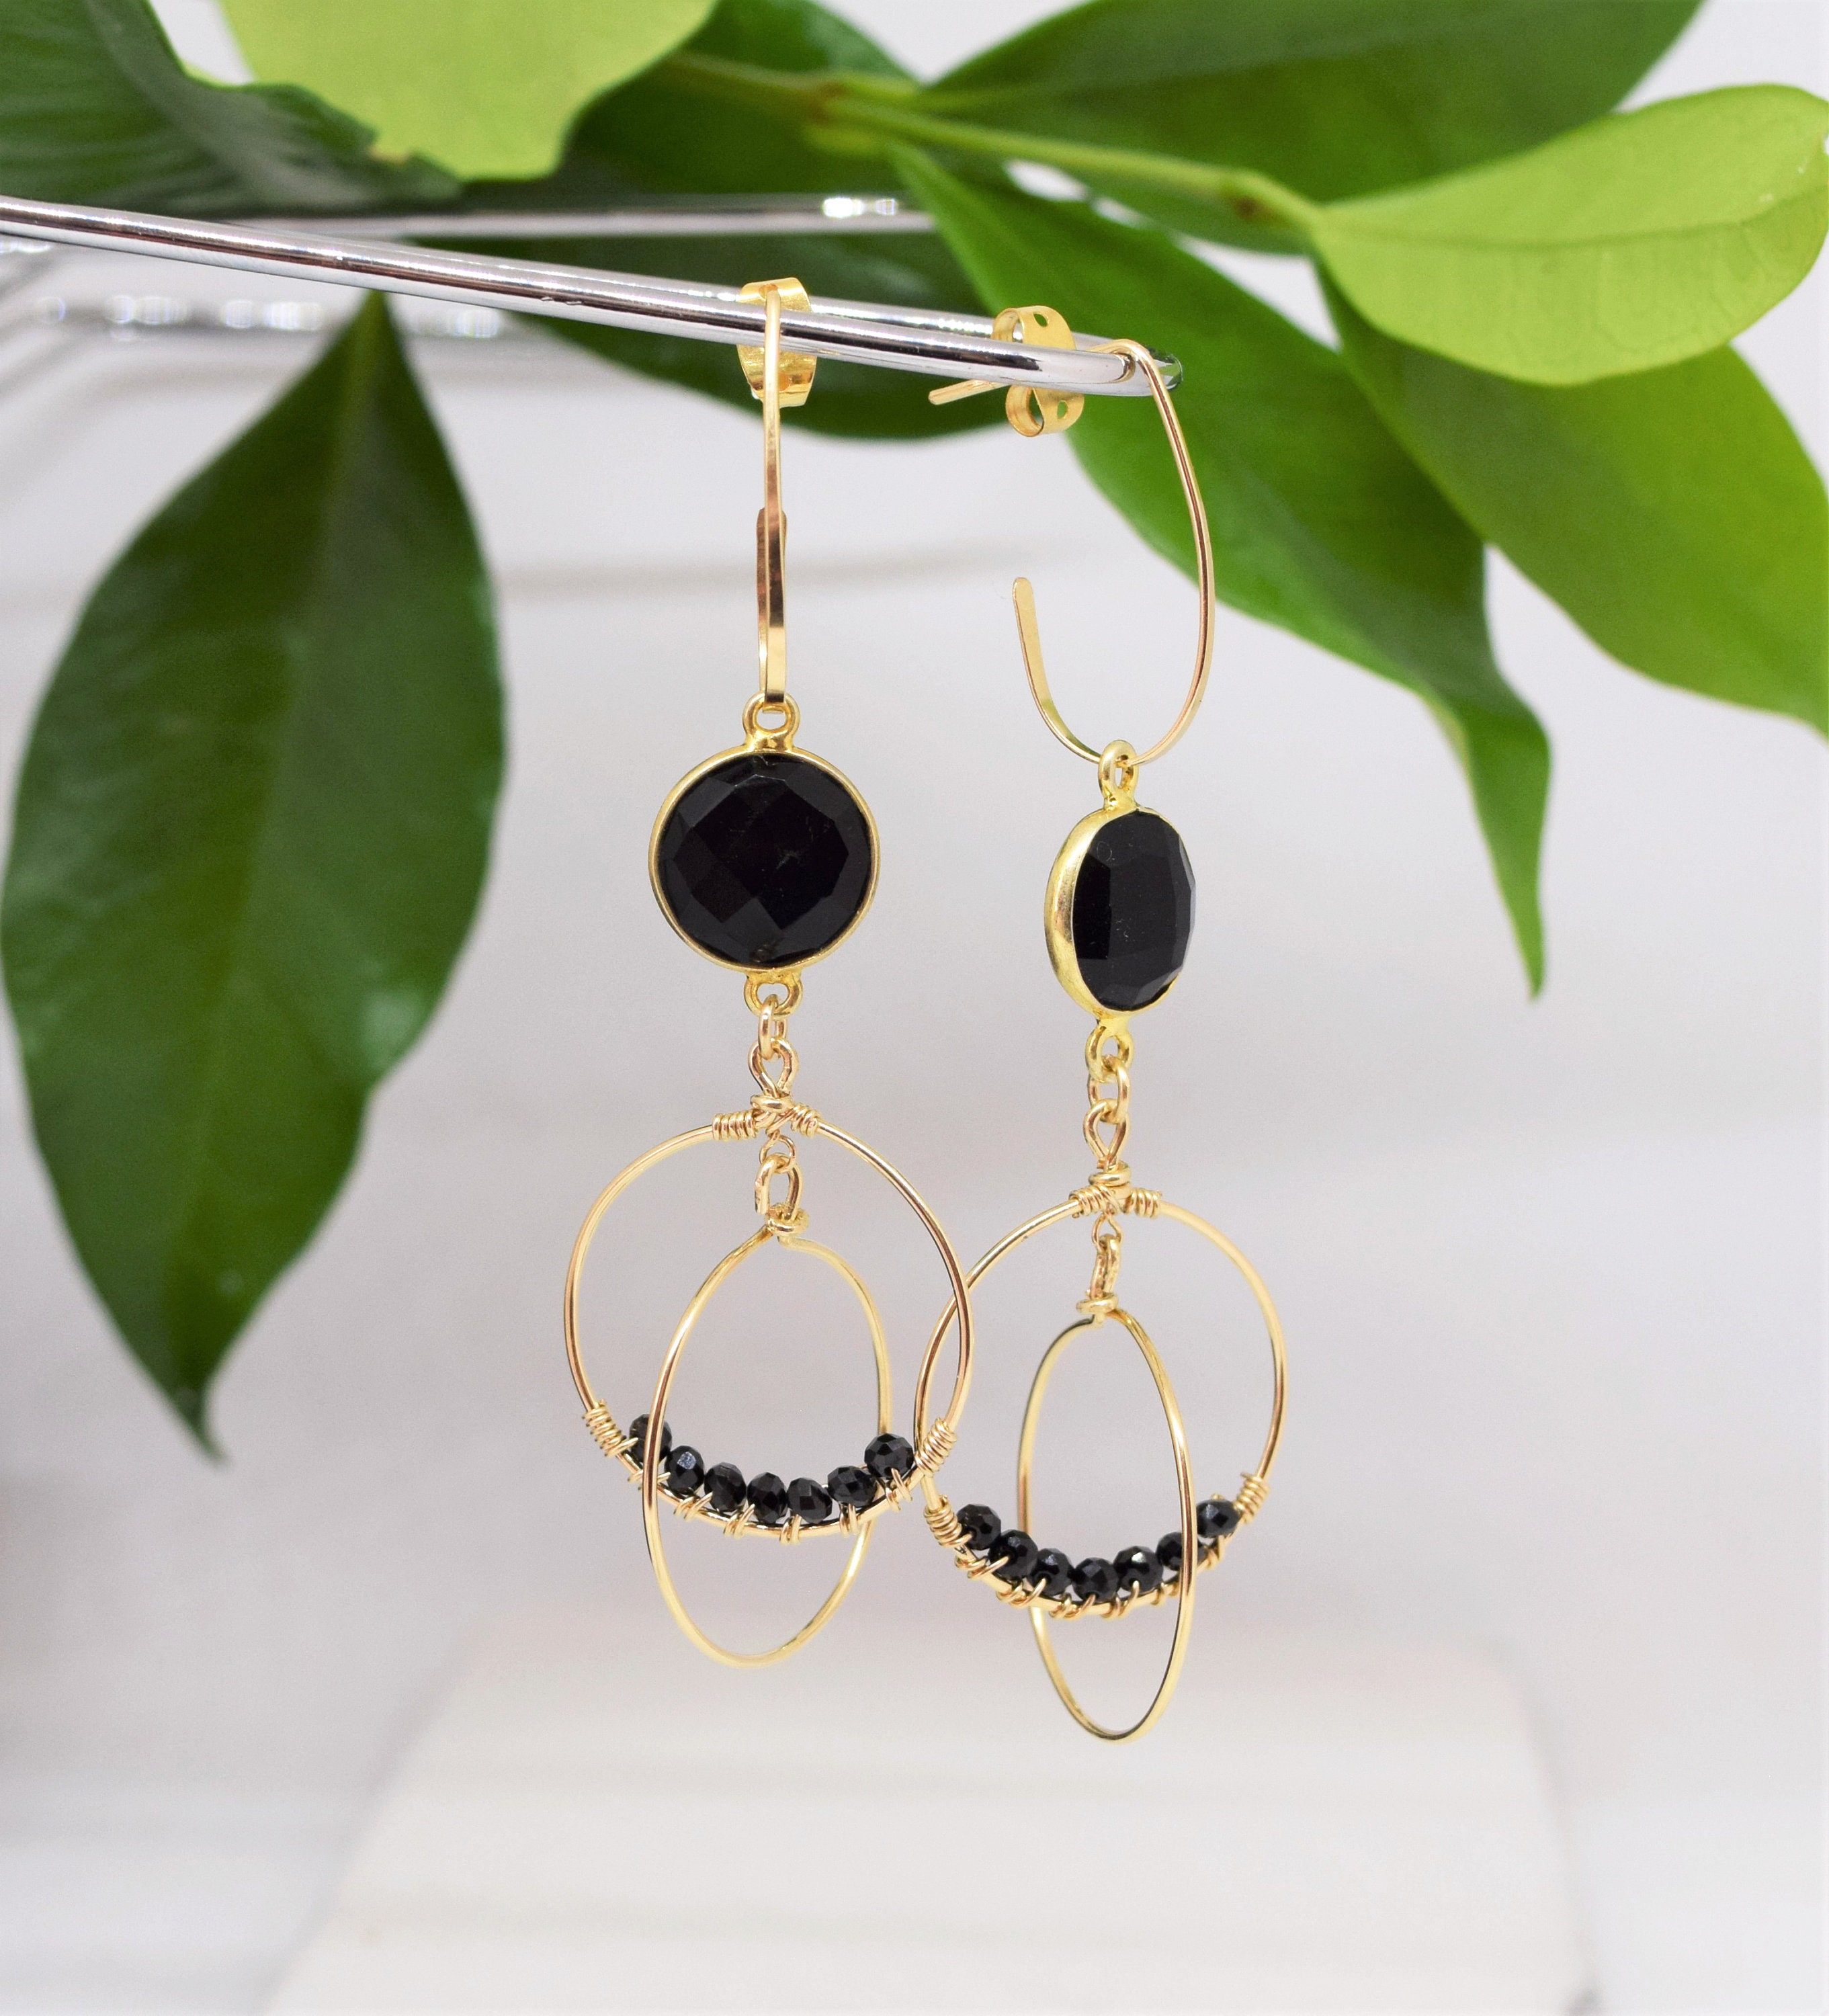 Gold Double Circle Hoop Earrings, Black Onyx and Spinel Wire Wrapped ...